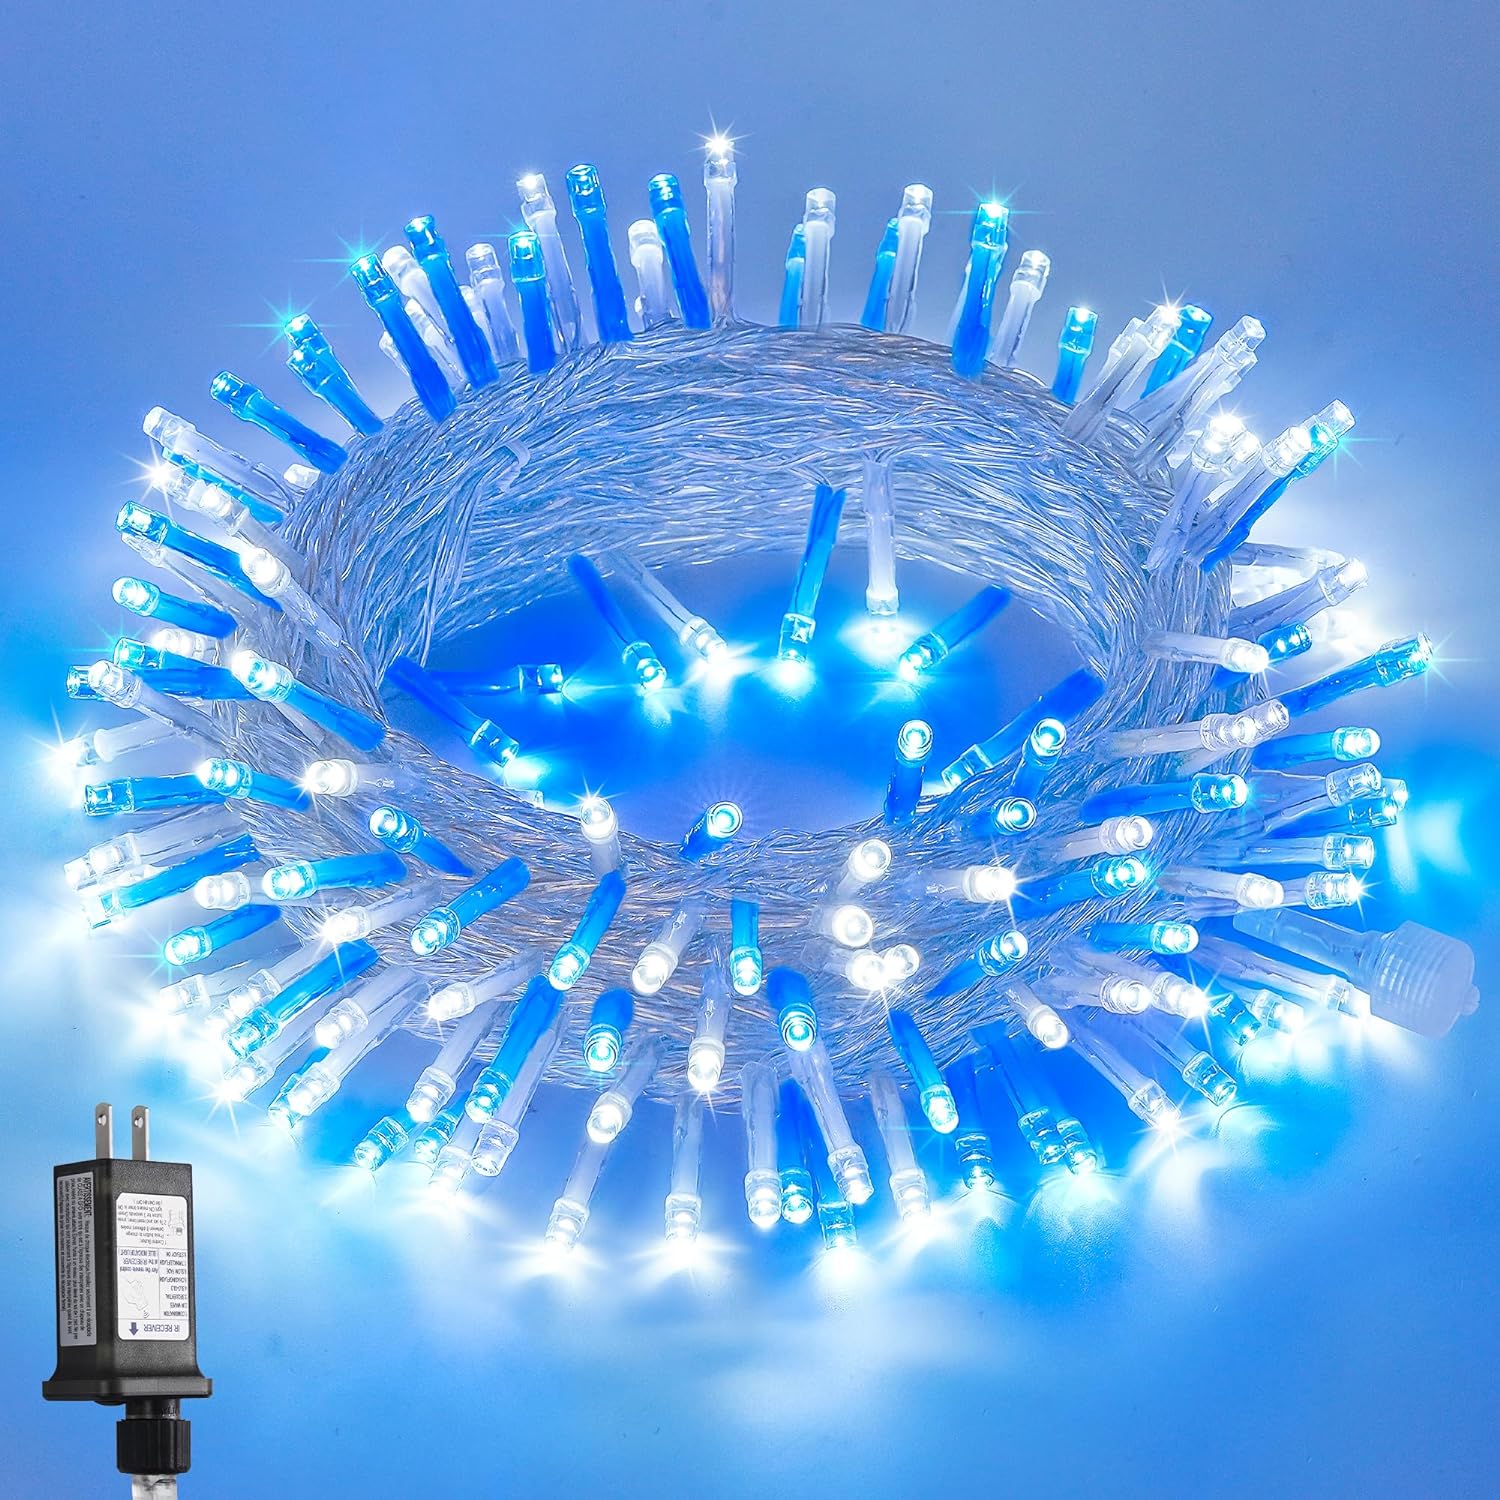 JMEXSUSS Blue and White String Lights Outdoor Indoor, 200 LED Christmas String Lights Clear Wire, 66ft Christmas Lights Plug in for Bedroom Tree Room Party Decorations